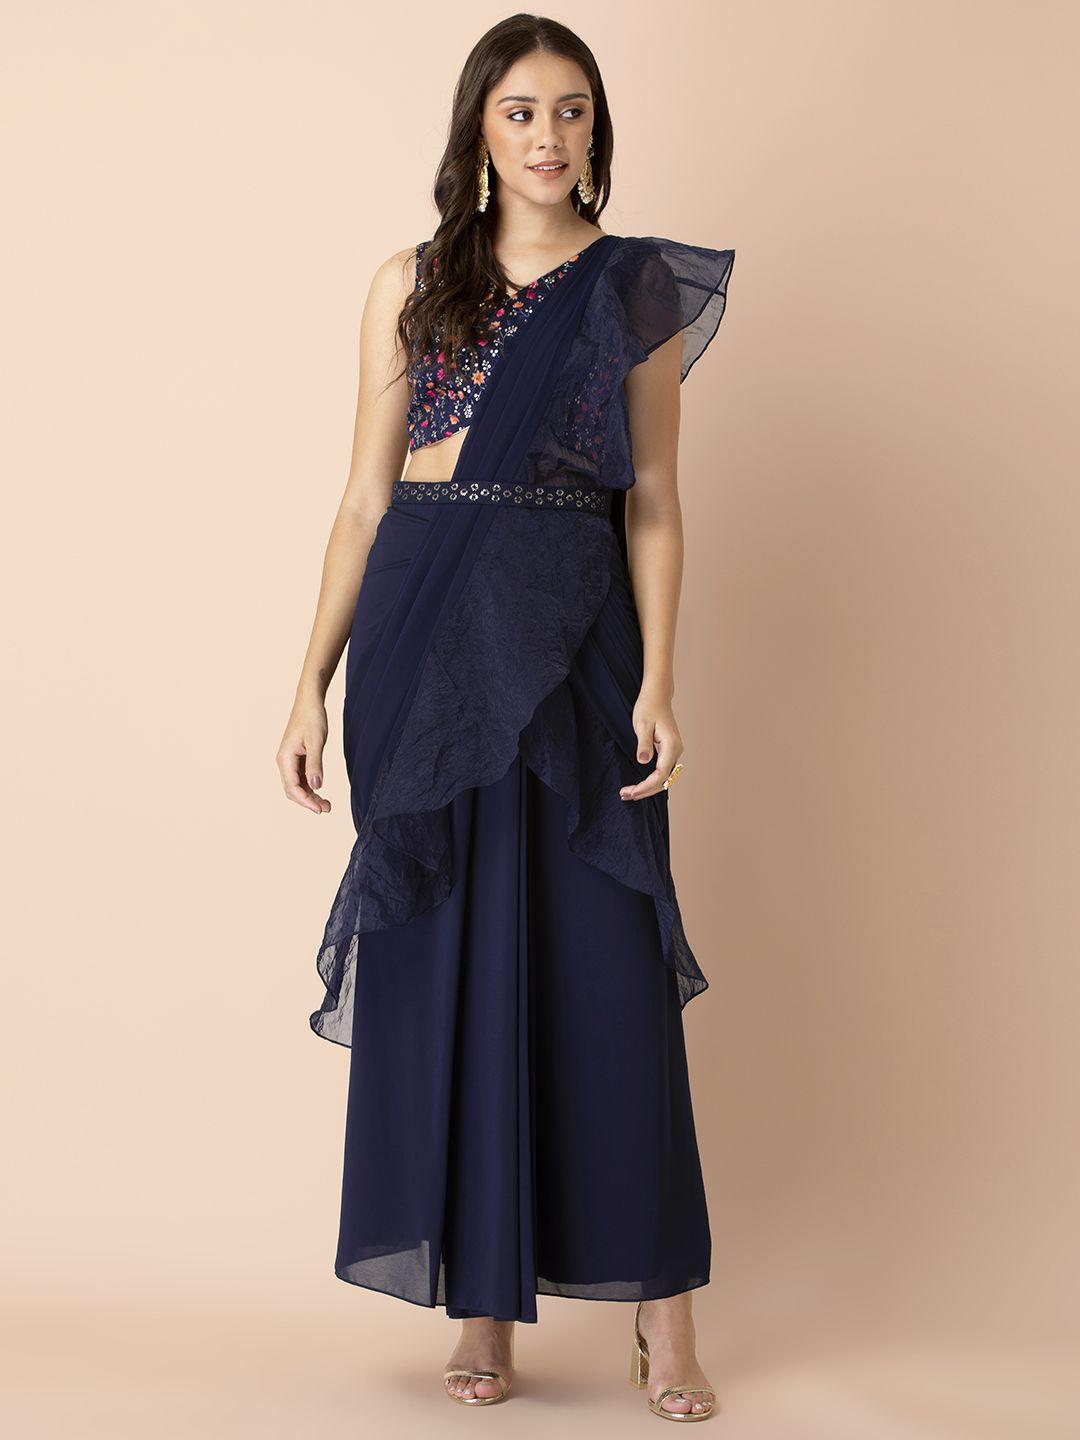 INDYA X Shraddha Kapoor Blue & Gold-Toned Ruffled Ready to Wear Saree with Attached Belt